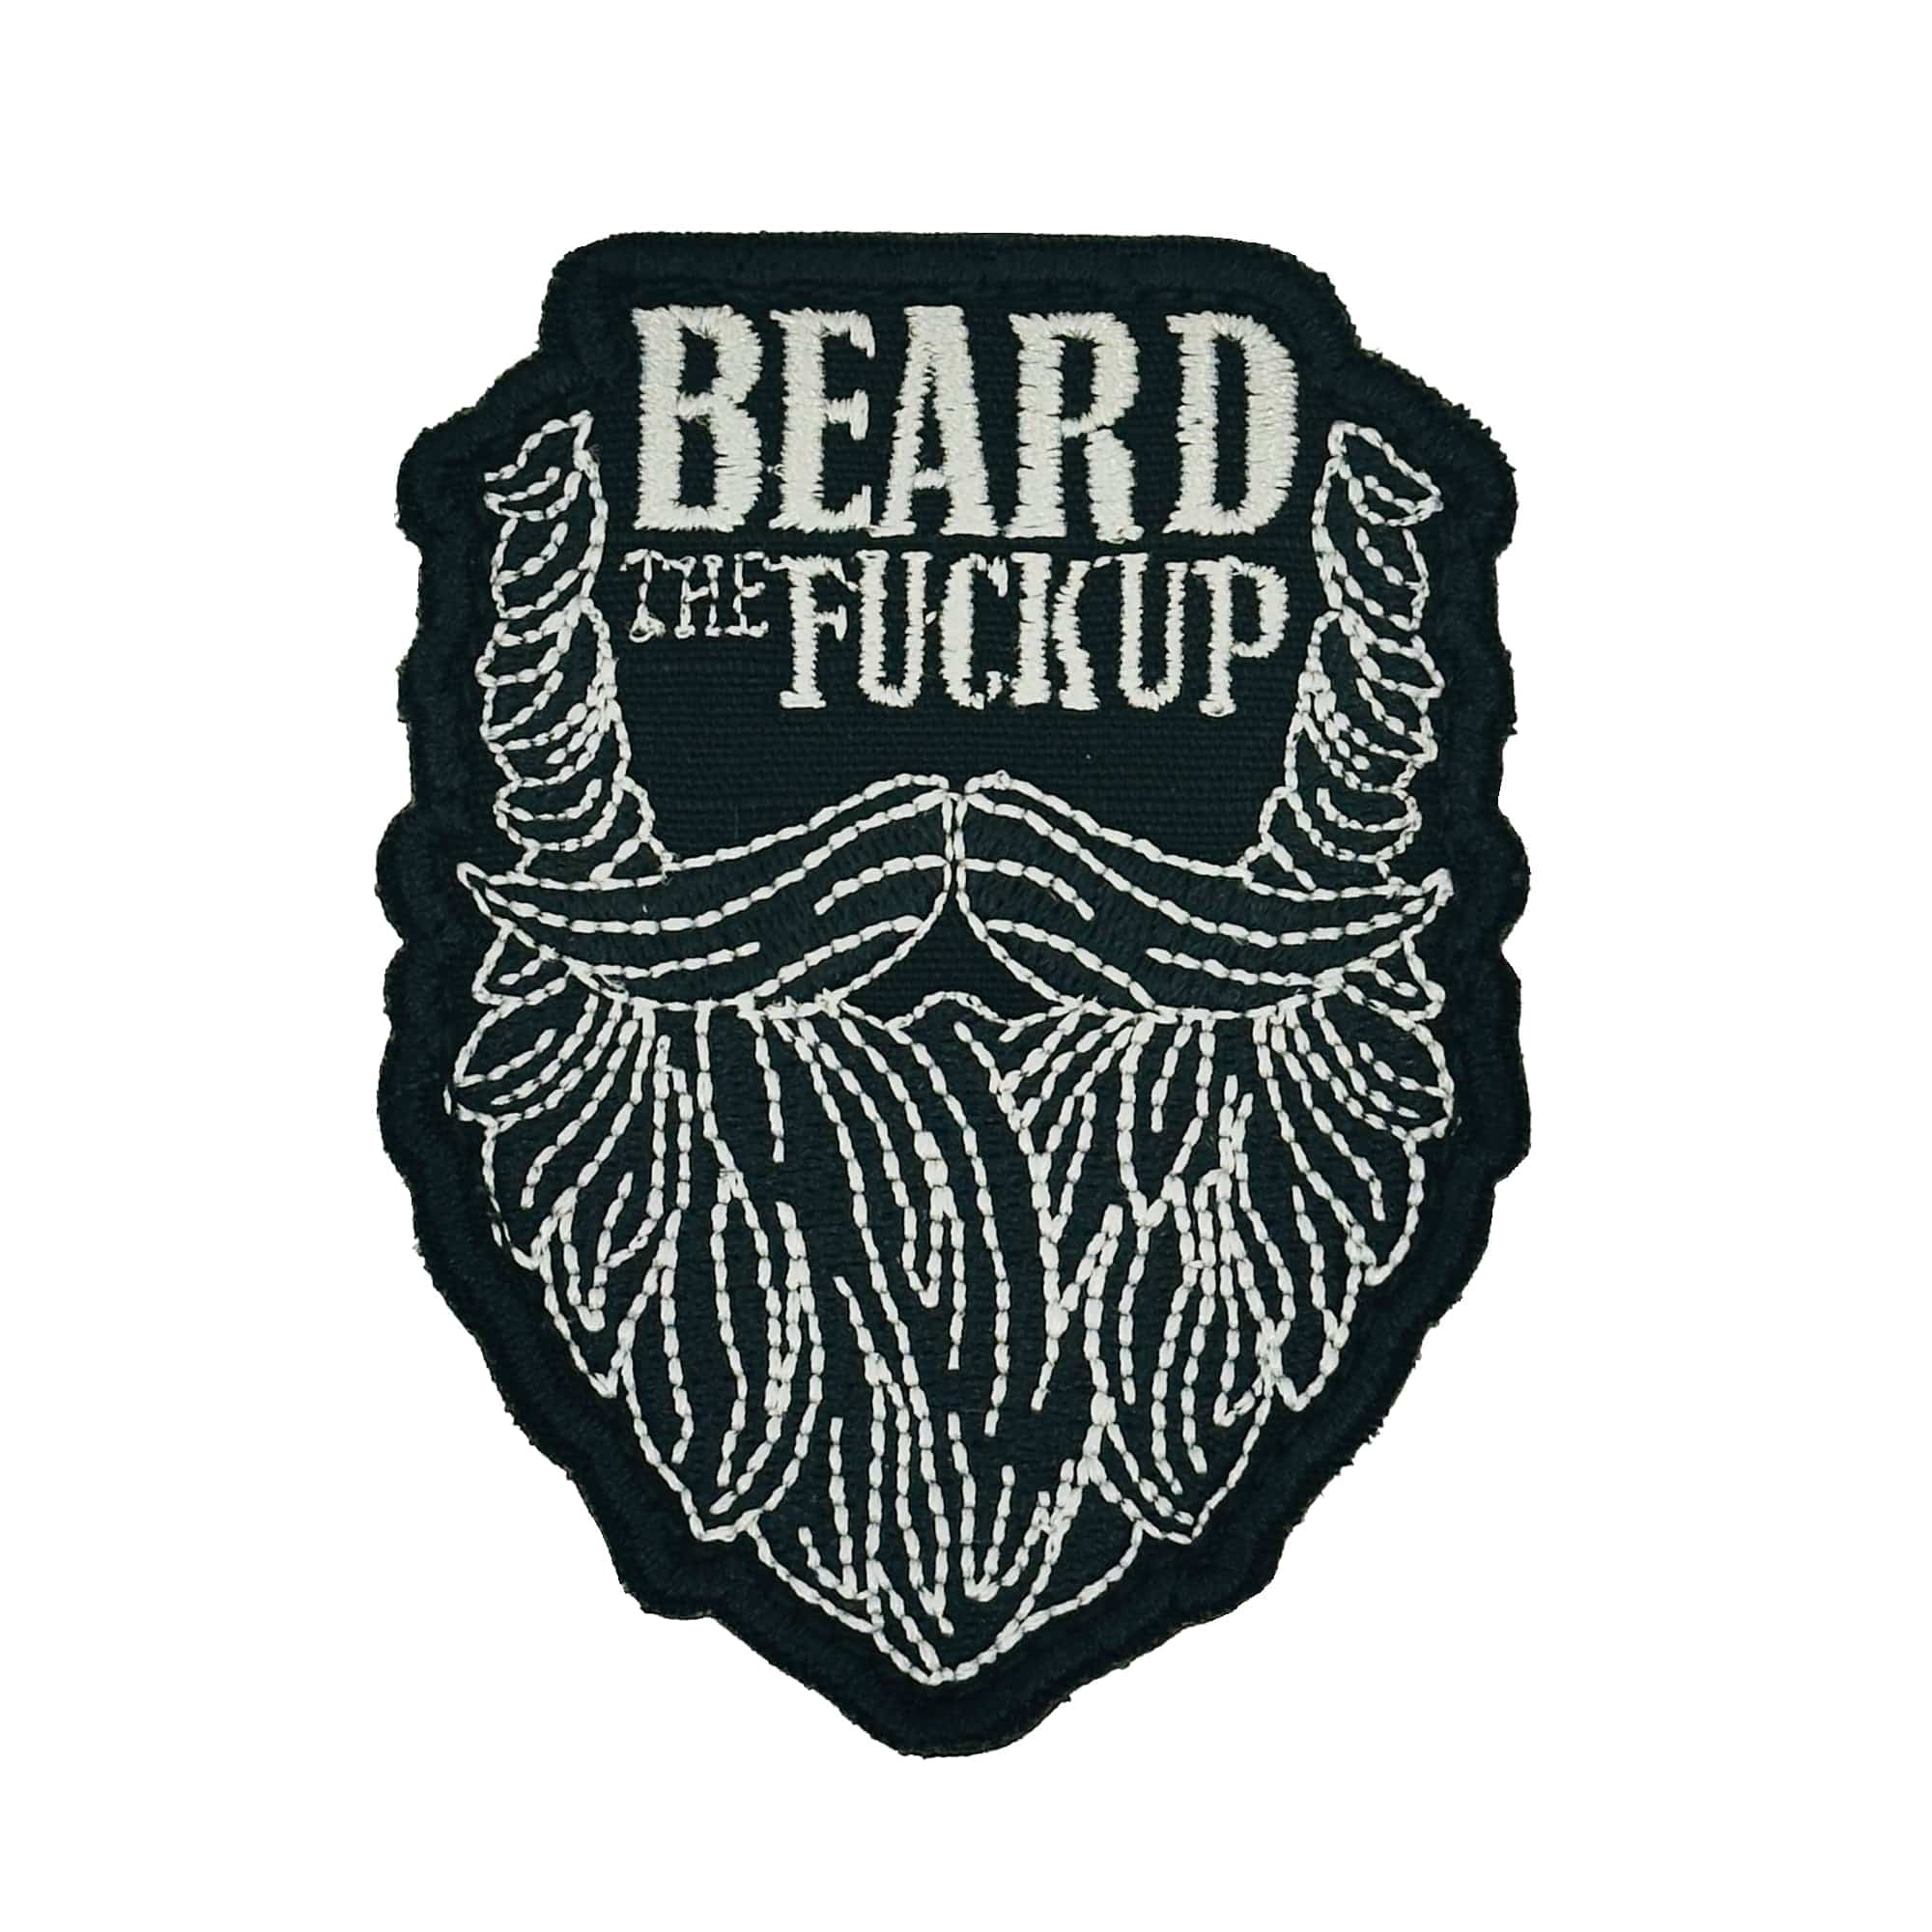 Tactical Gear Junkie Patches Black Beard the Fuck Up - 3" Laser Cut Patch